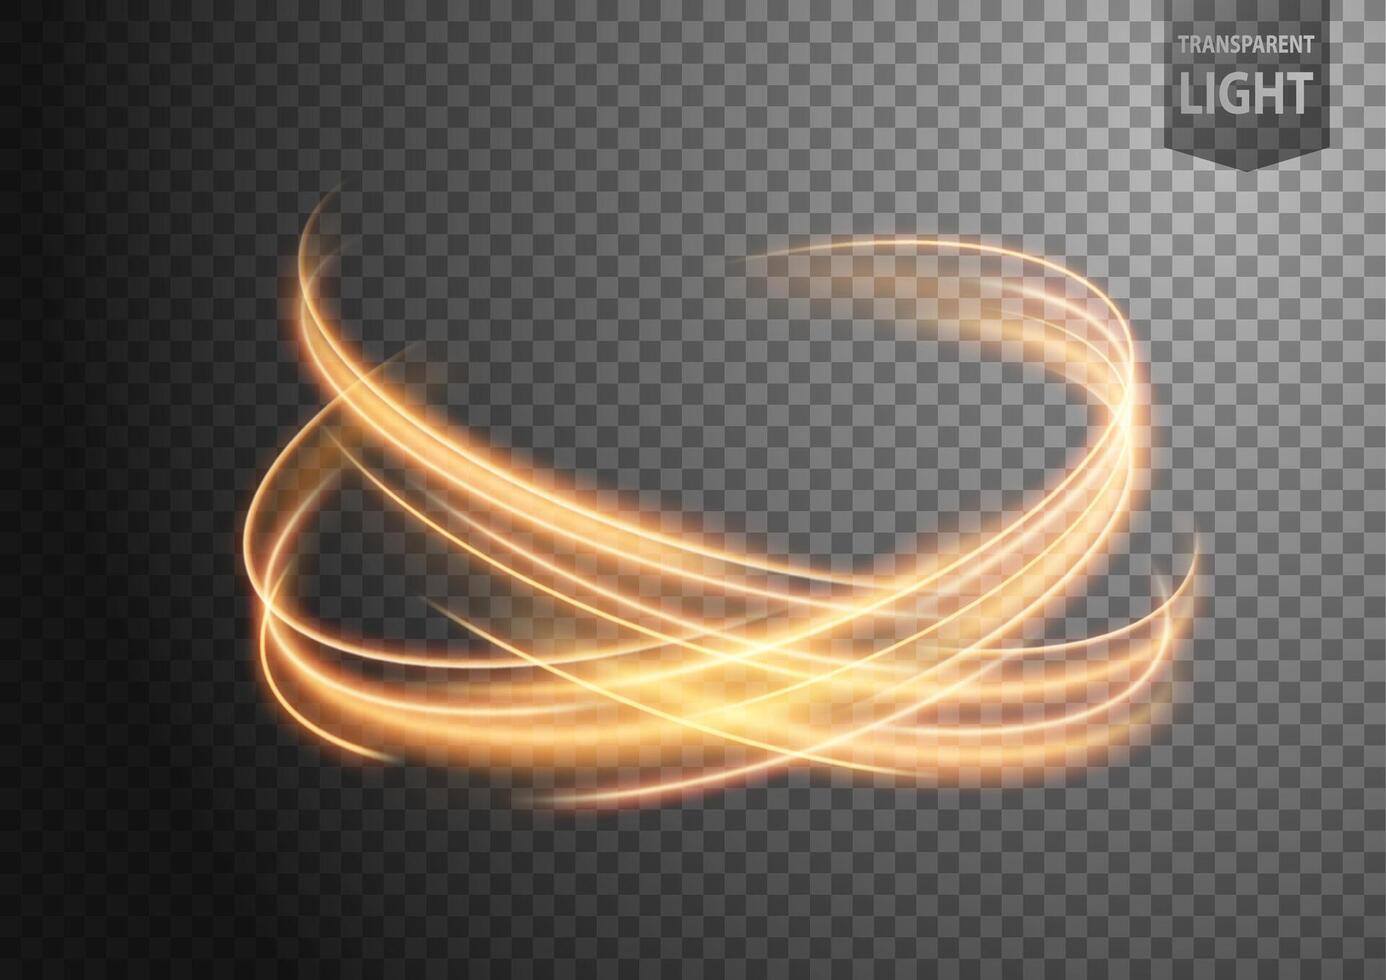 Abstract Gold Twist of Light with A Background, Isolated and Easy to Edit, Vector Illustration